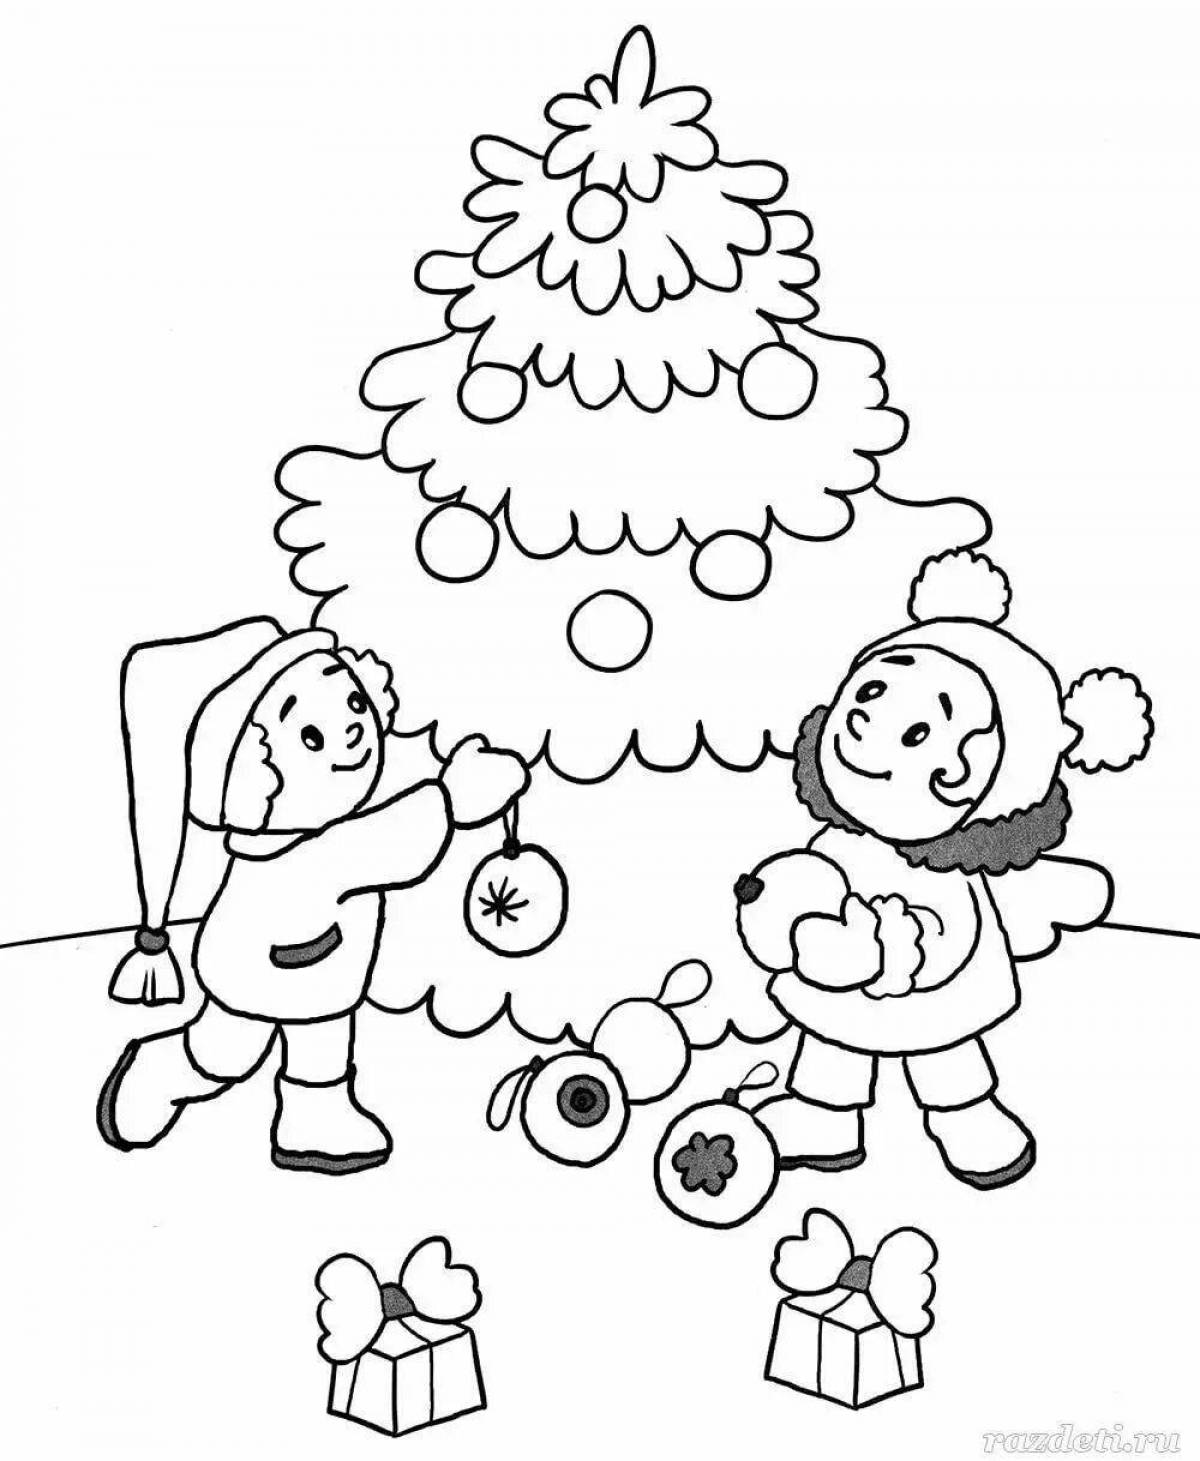 Coloring book magical new year story